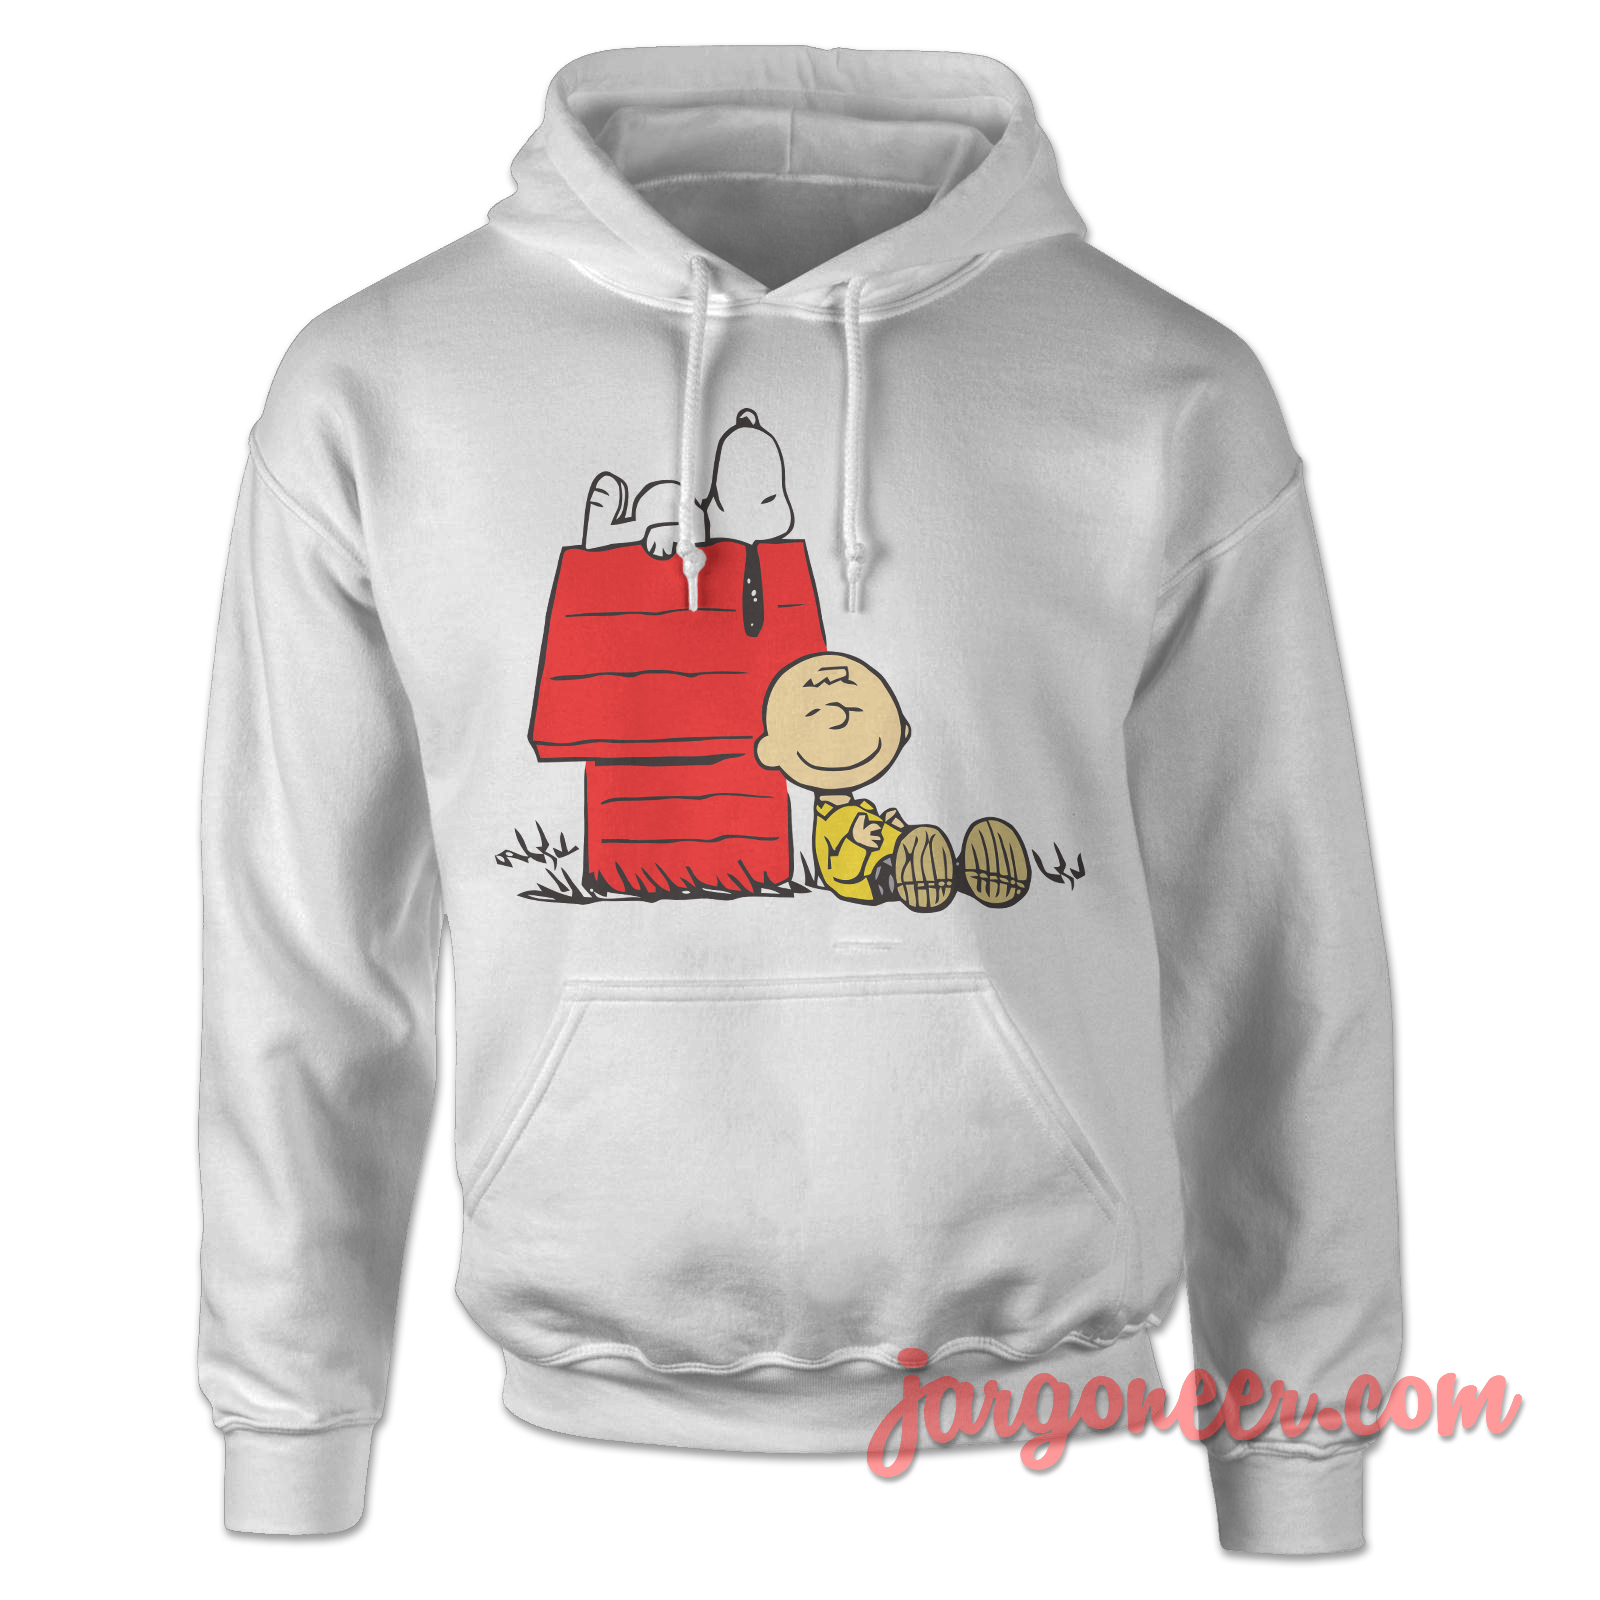 Snoopy And Charlie White Hoody - Shop Unique Graphic Cool Shirt Designs